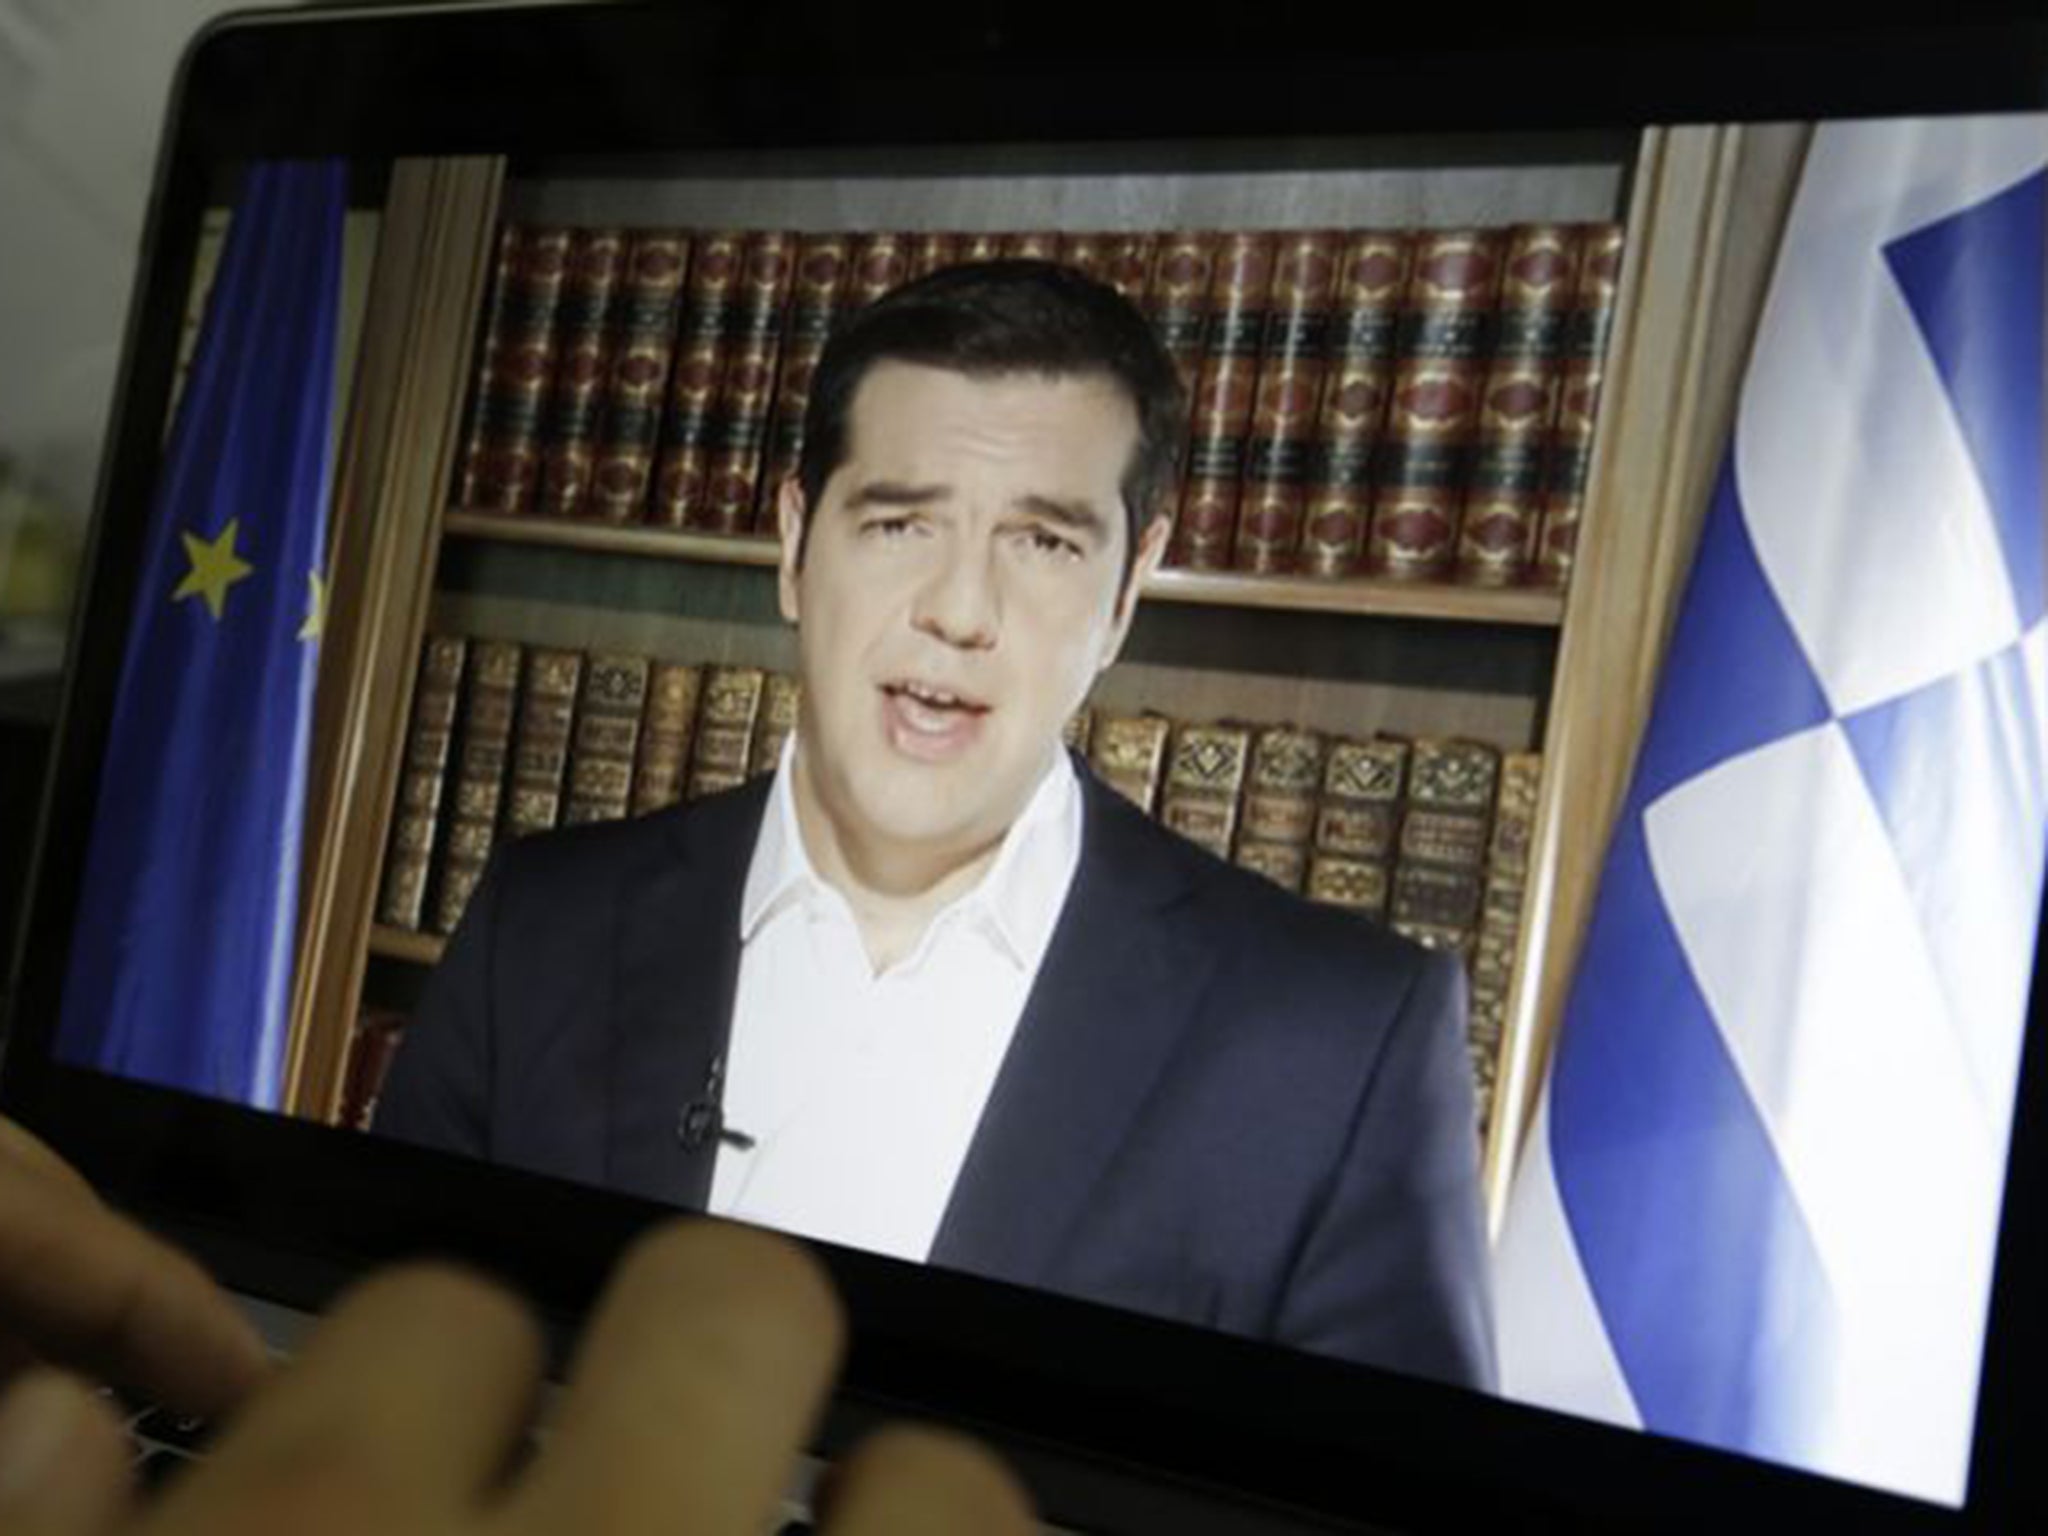 Greece’s Prime Minister Alexis Tsipras gave a televised address to the nation ahead of the vote